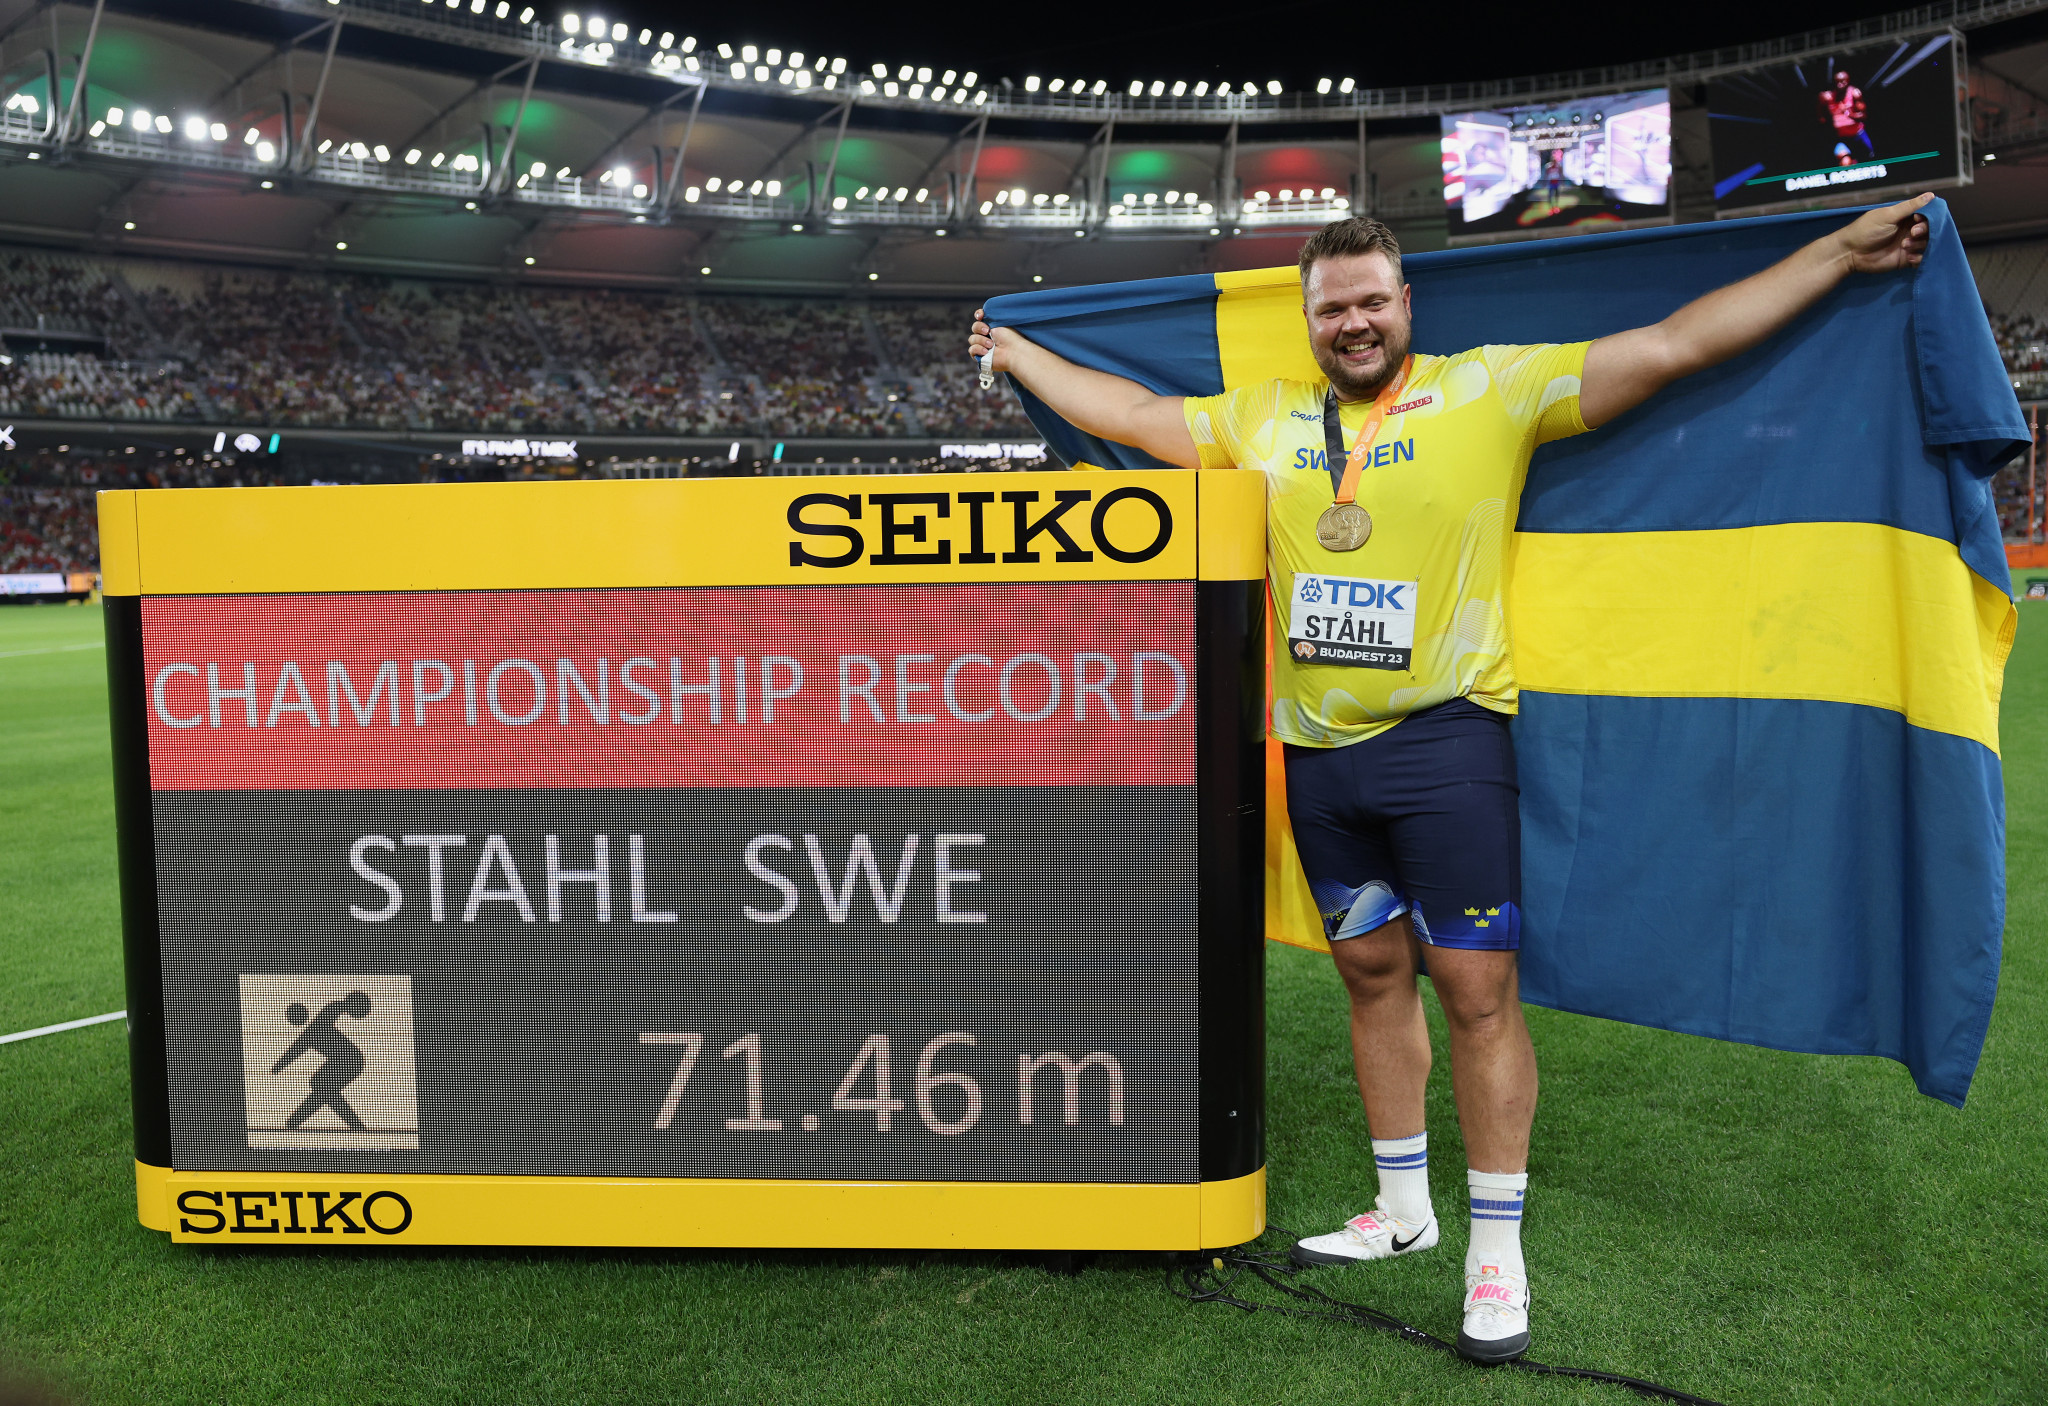 Ståhl denies Čeh in dramatic men's discus final at World Athletics Championships